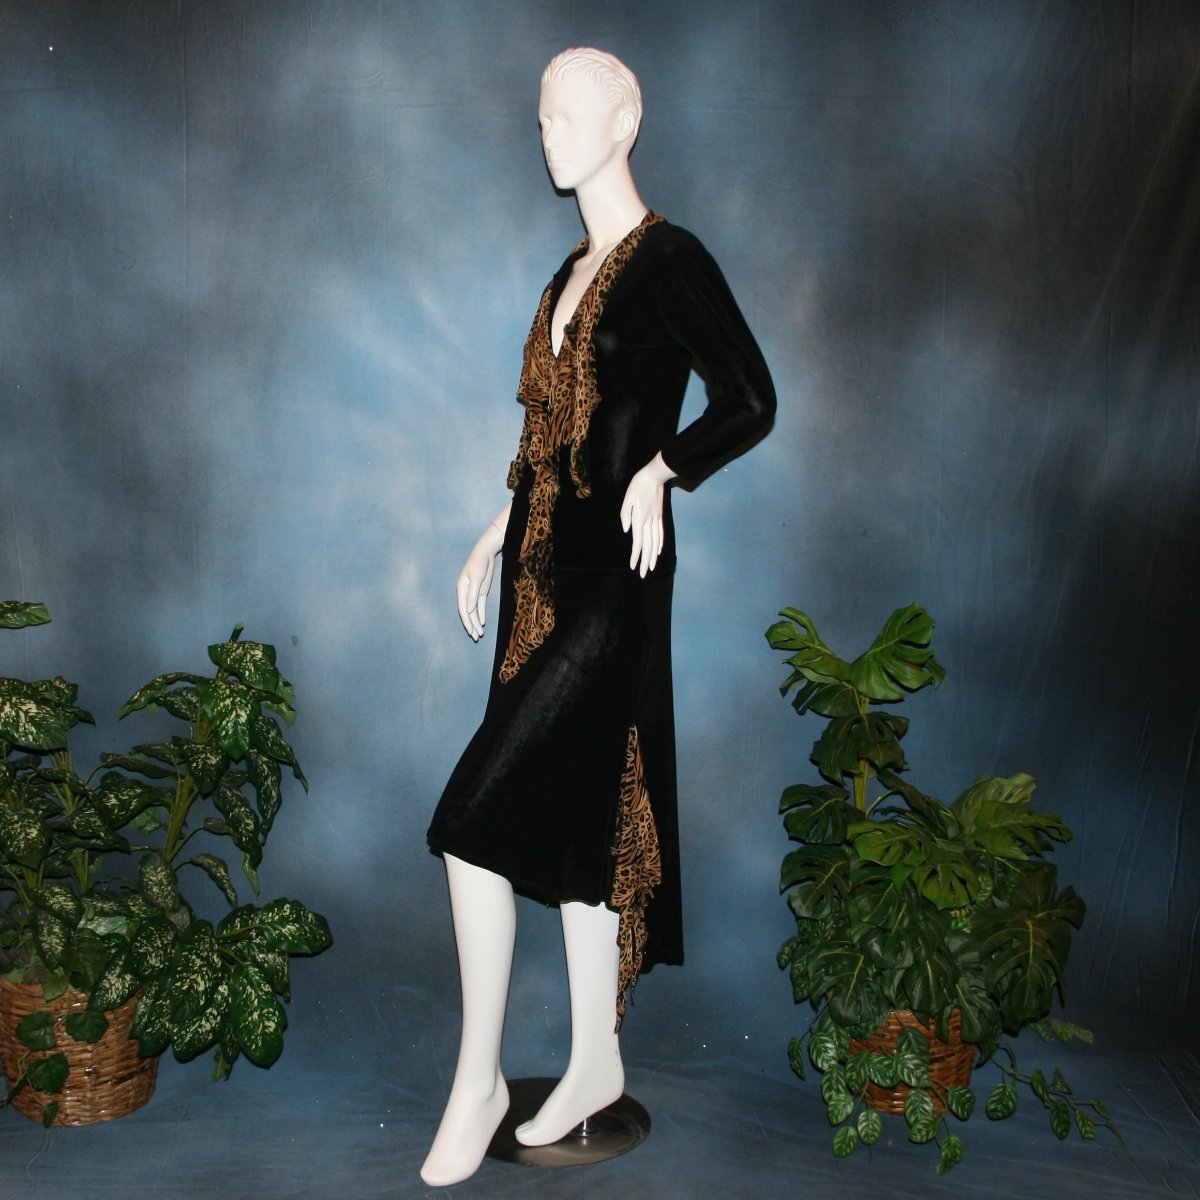 side view of Black ballroom dance top with cheetah ruffly neck & tie of luxurious black slinky and black Latin/rhythm flaired skirt with cheetah print slinky ruffly accents, which drapes down longer in the back. Great set for ballroom teachers!Tie on top can be worn open or closed.